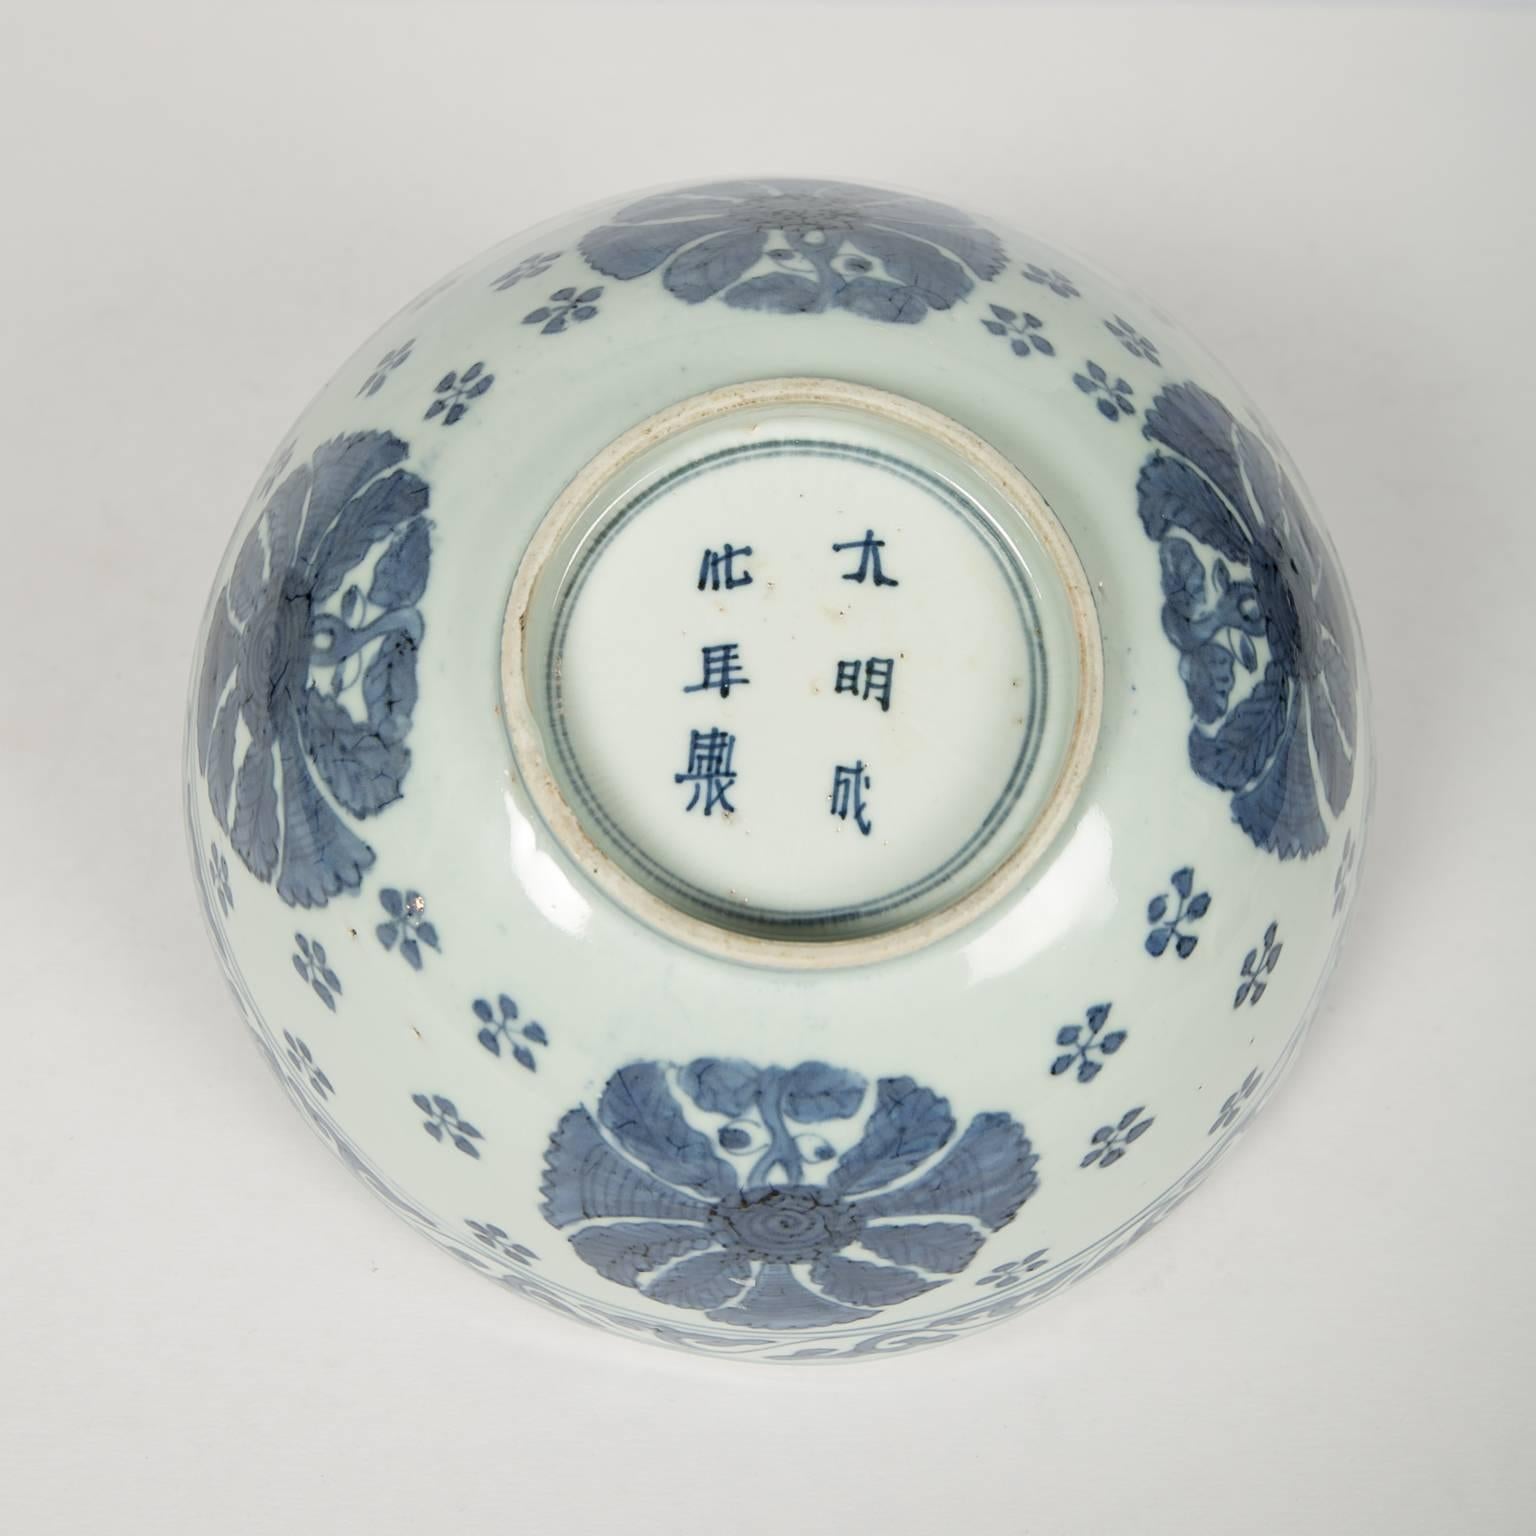 Antique Chinese Blue and White Porcelain Bowl Made in the Daoguong Reign 1820-50 1